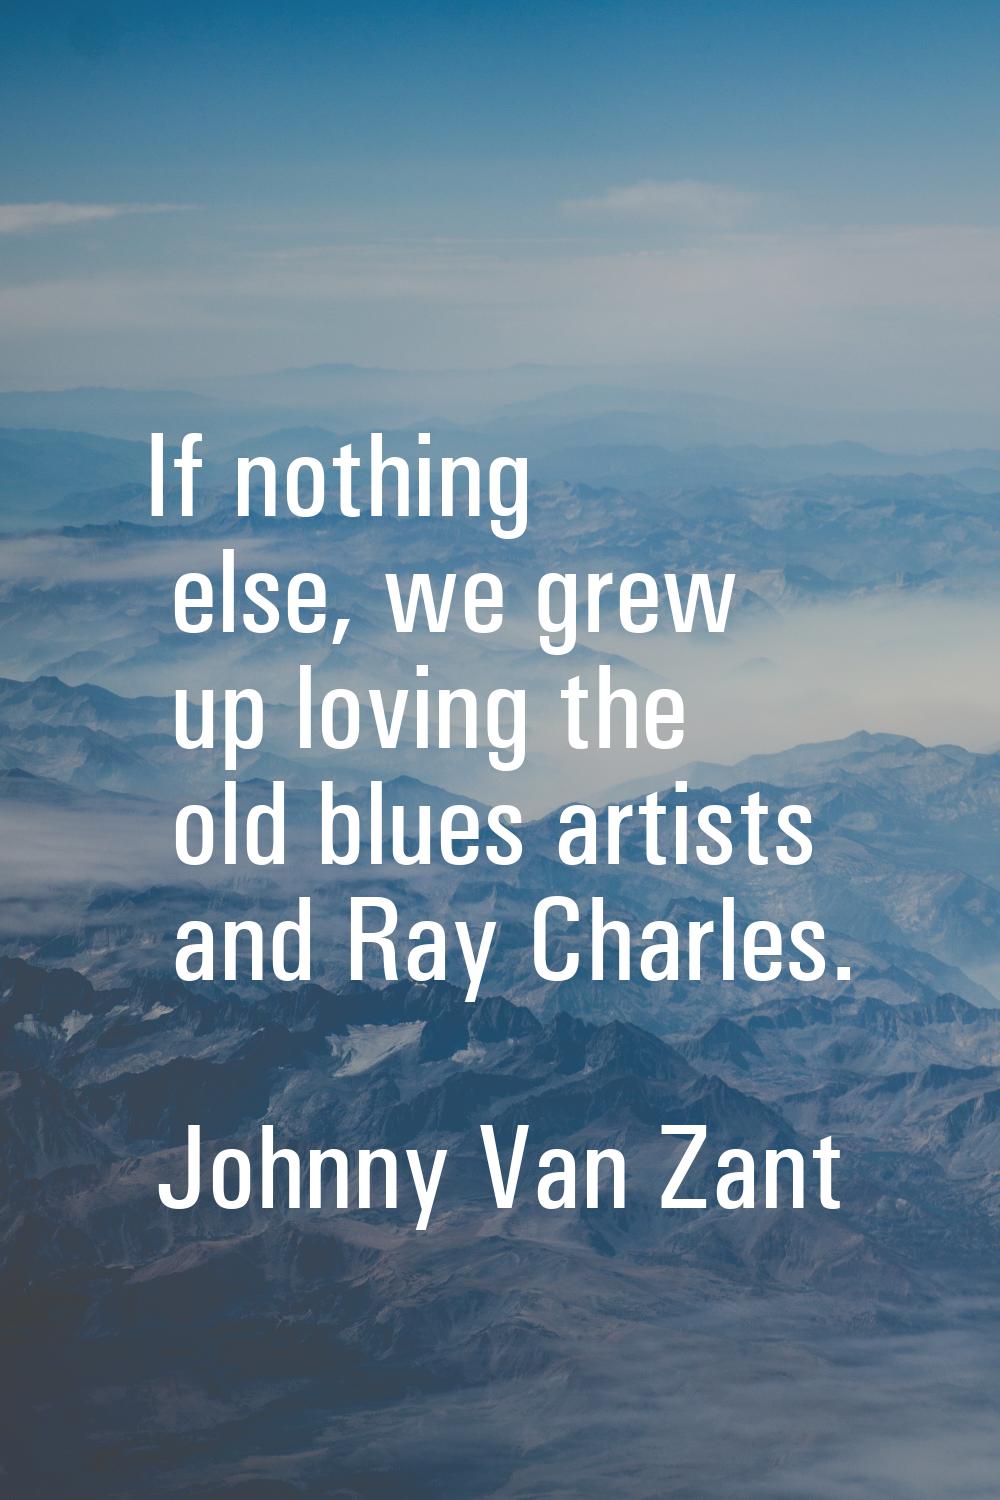 If nothing else, we grew up loving the old blues artists and Ray Charles.